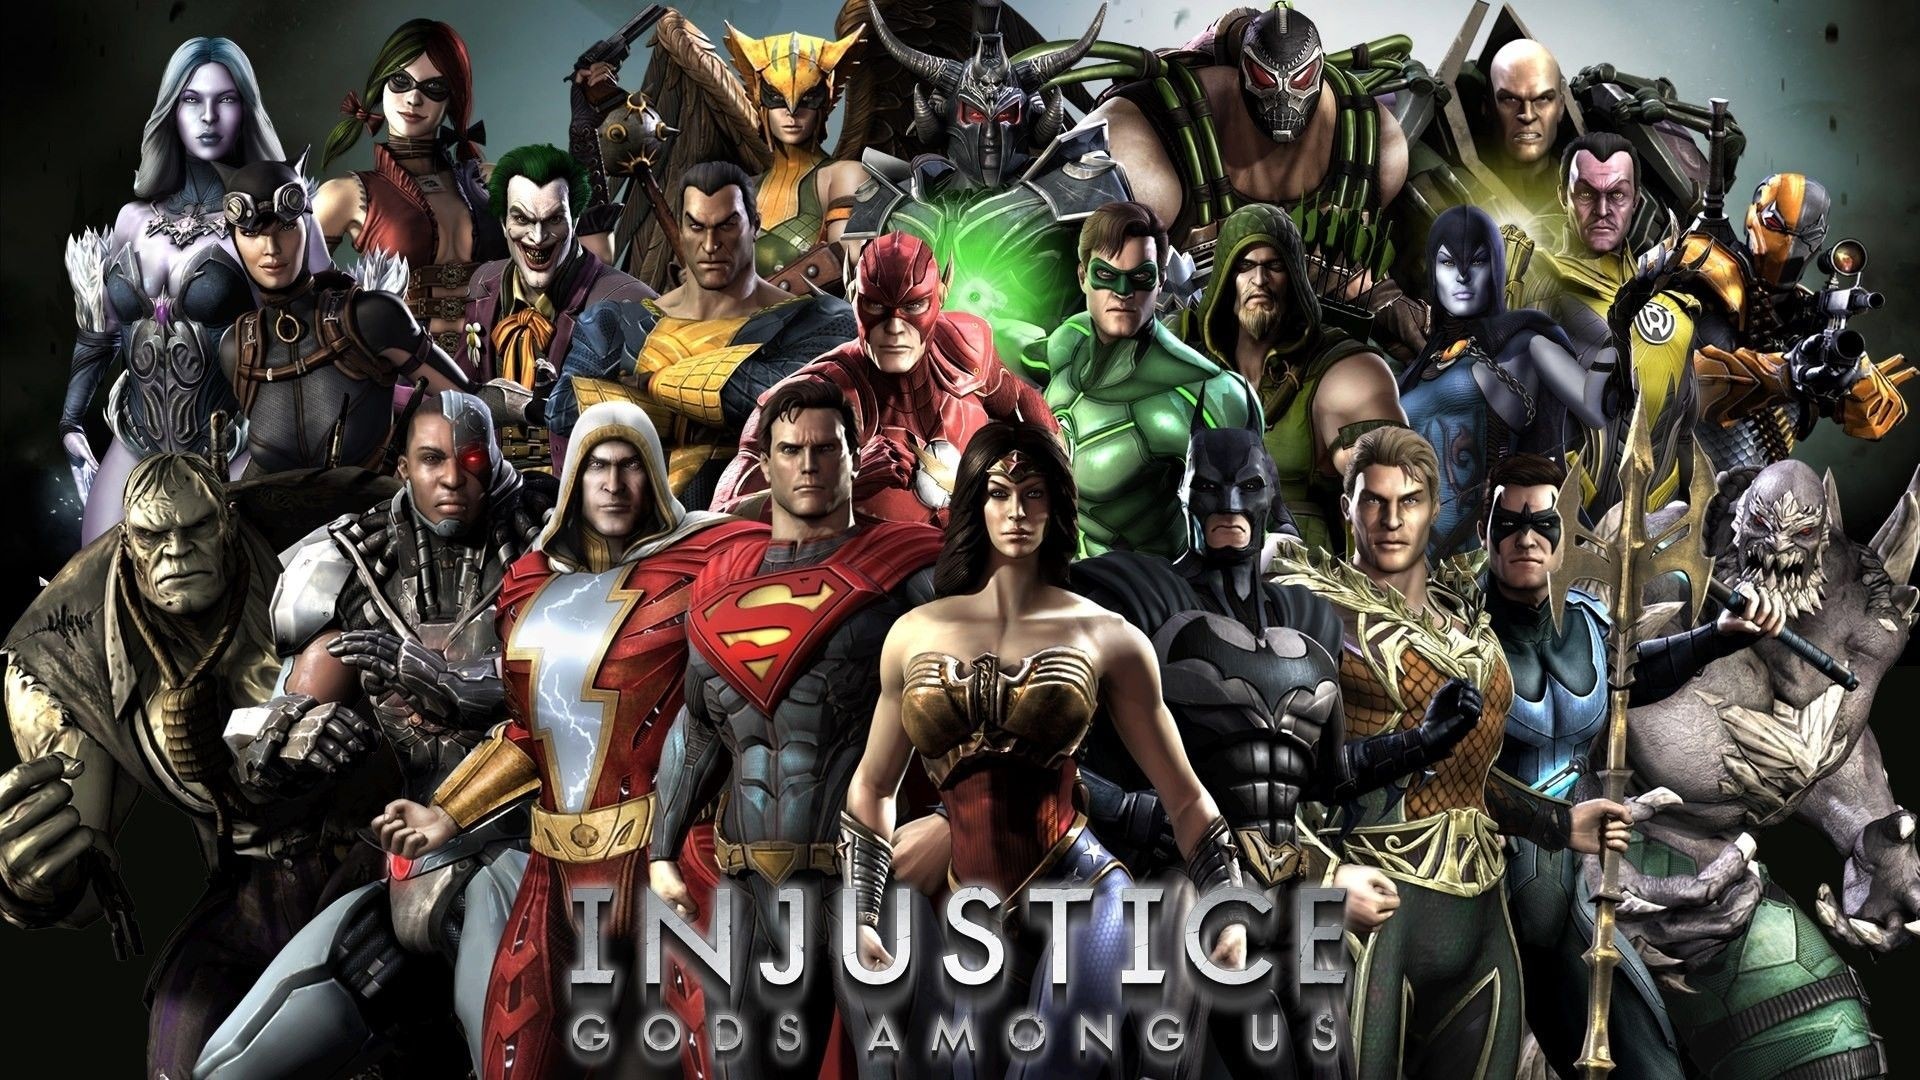 1920x1080 marvel vs dc wallpaper widescreen - This is a great add to the board  because these